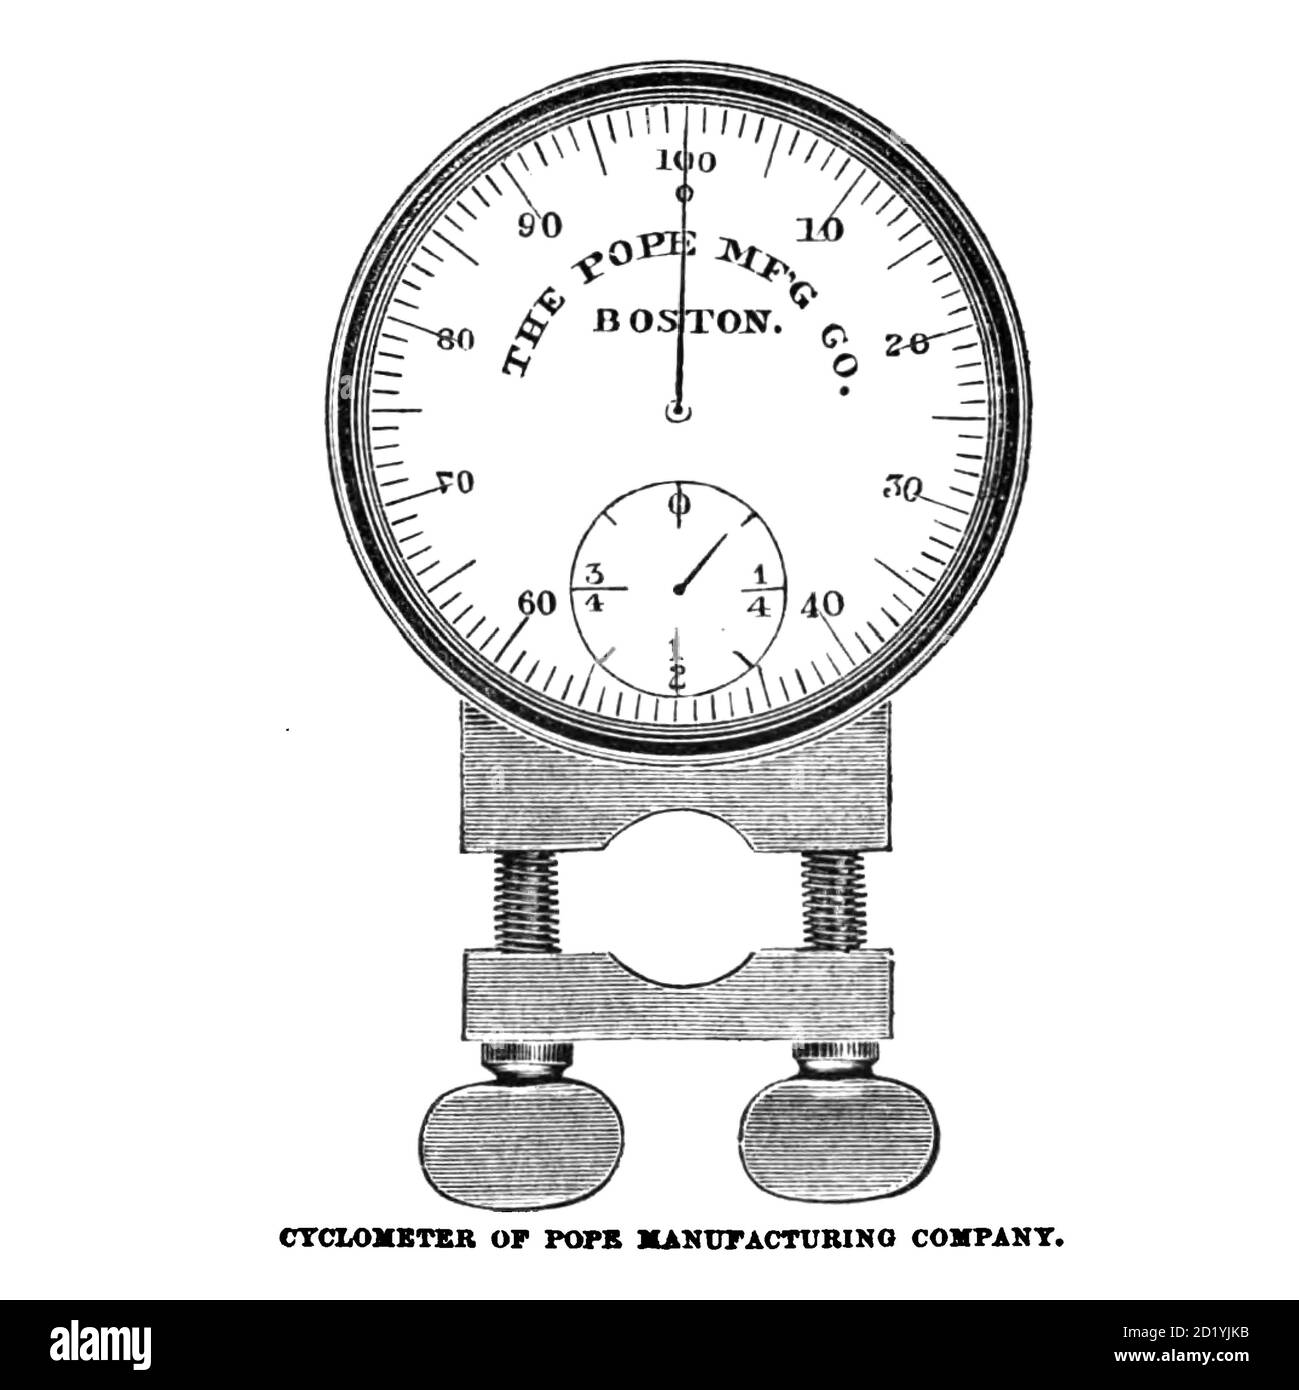 Cyclometer of Pope manufacturing Company from The American bicycler: a manual for the observer, the learner, and the expert by Pratt, Charles E. (Charles Eadward), 1845-1898. Publication date 1879. Publisher Boston, Houghton, Osgood and company Stock Photo